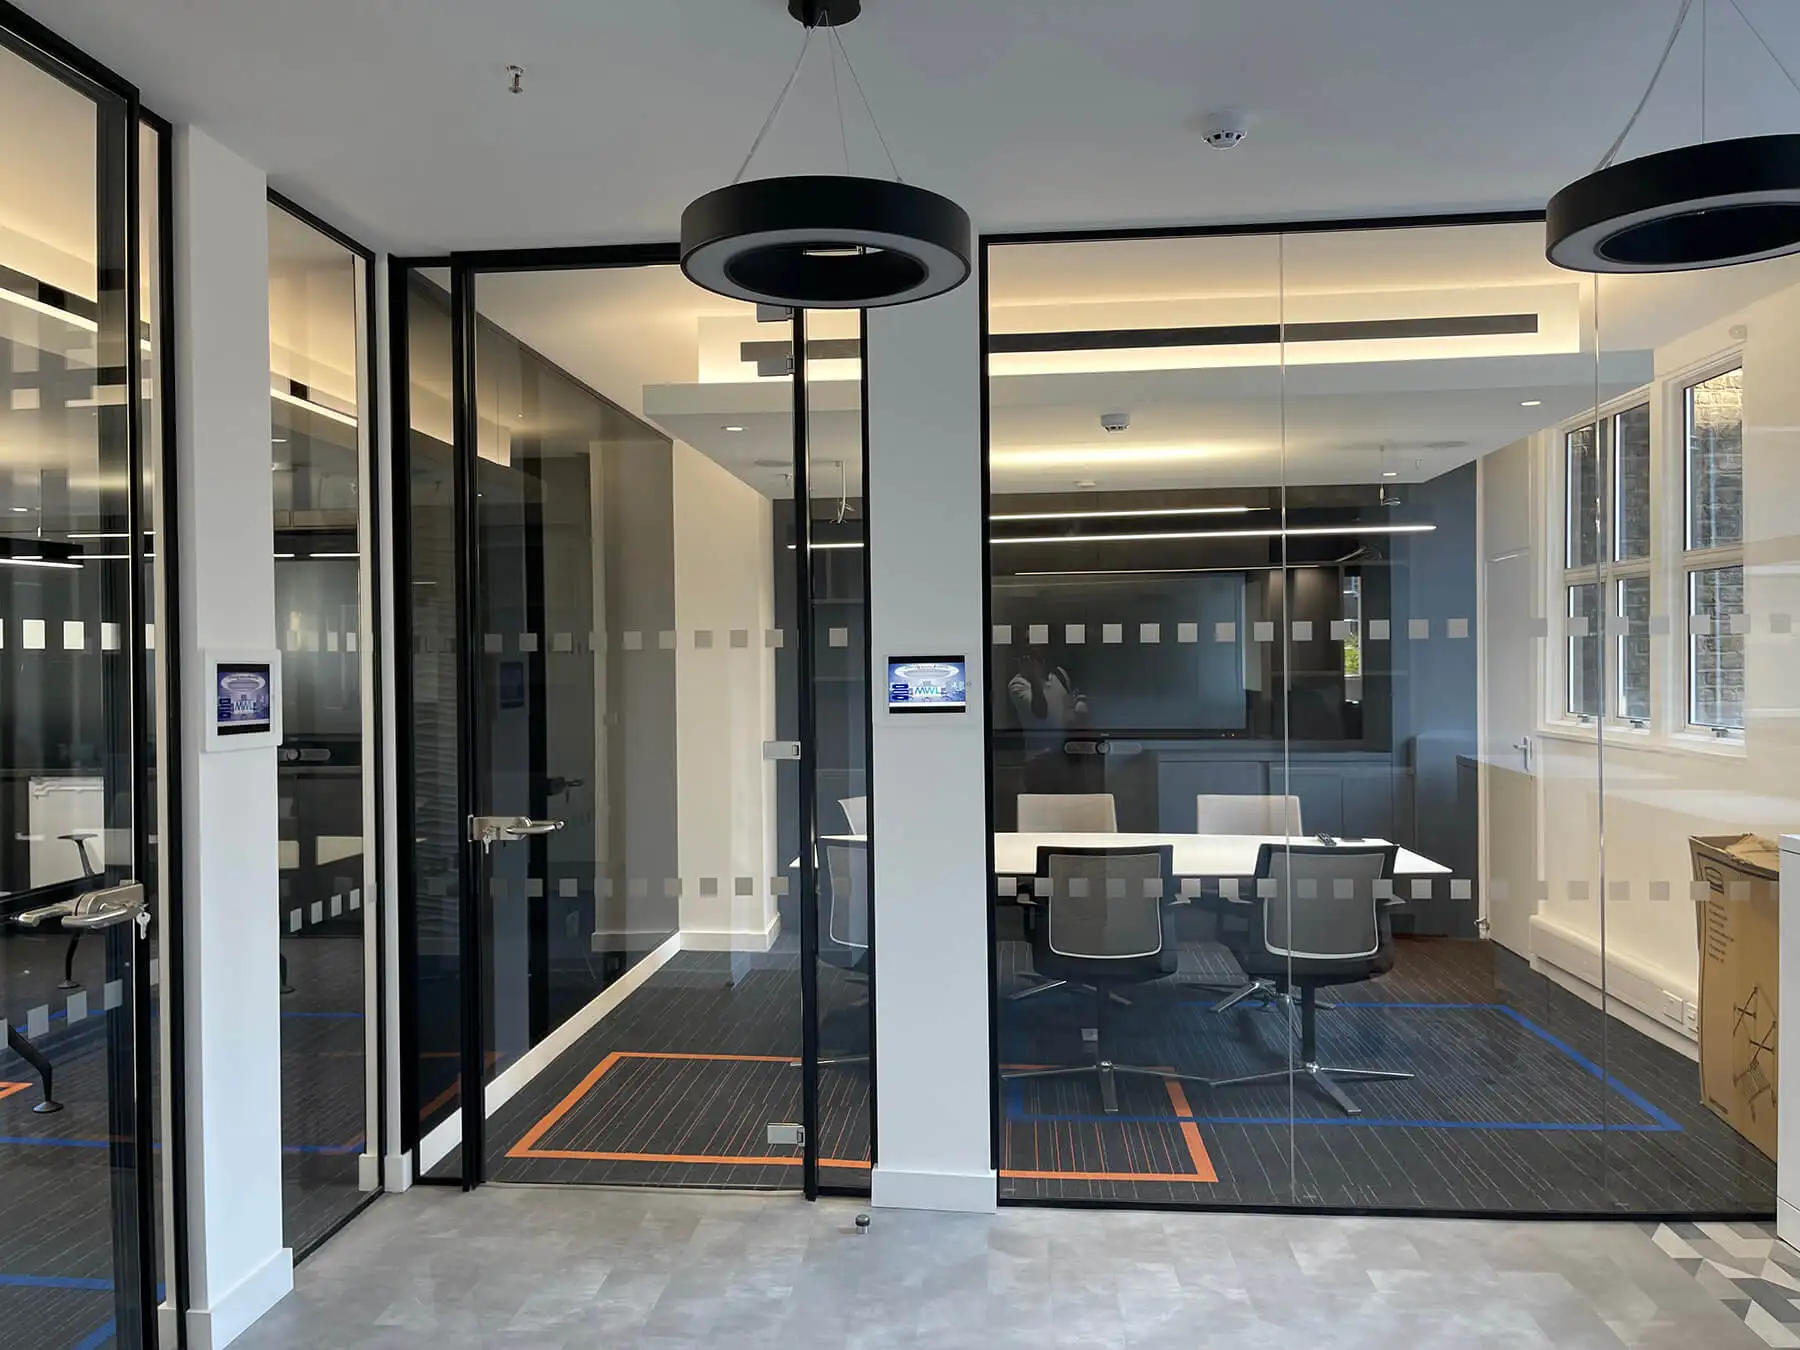 Office space with black framed glass partitions and designer flooring